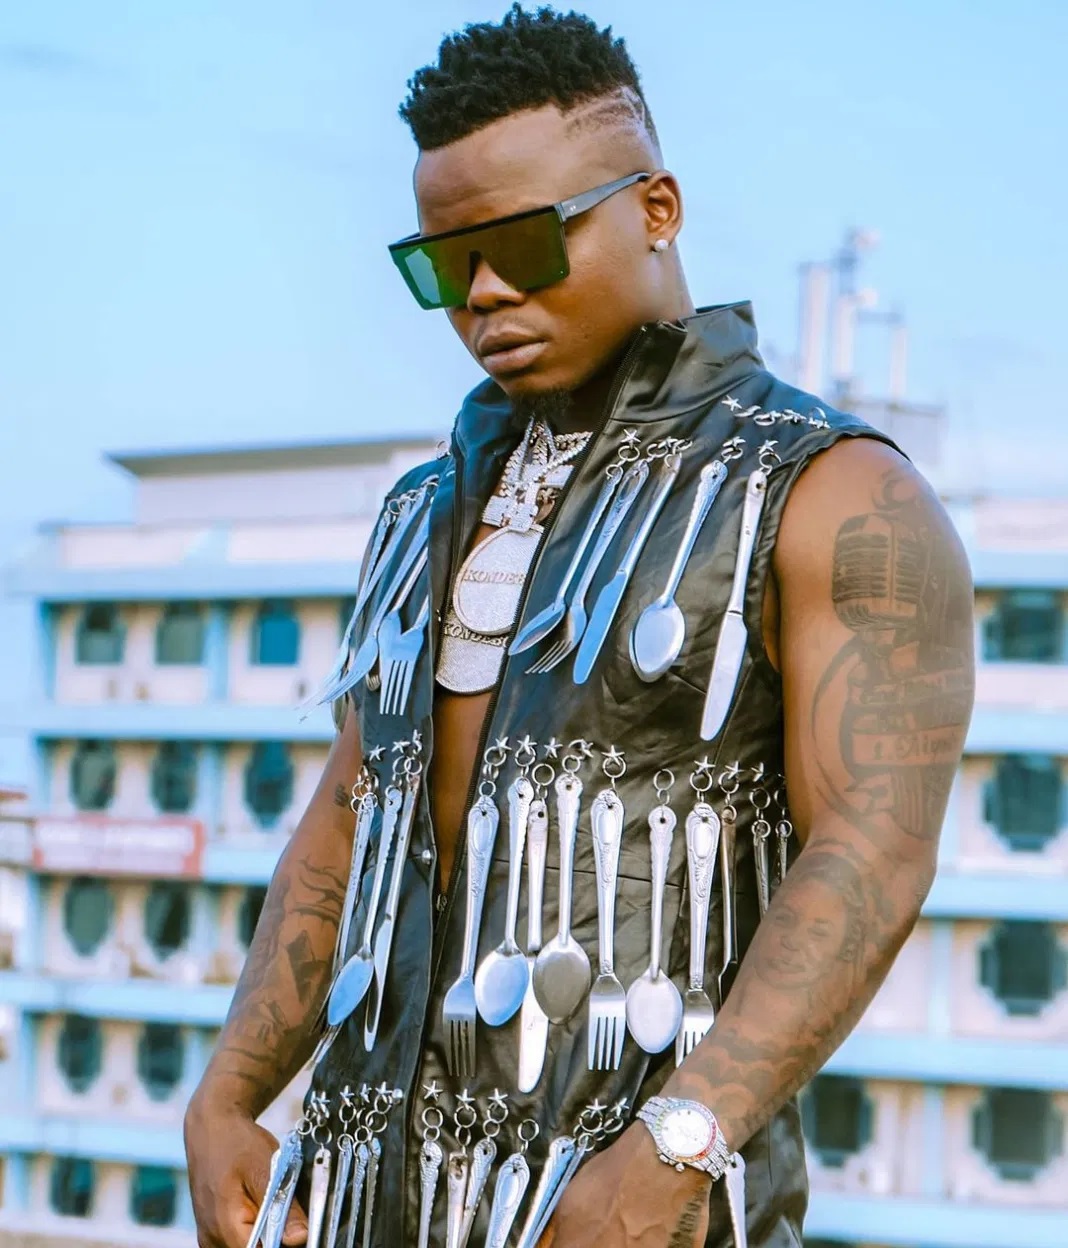 HARMONIZE’s latest fashion style leaves fans doubting his mental status ...